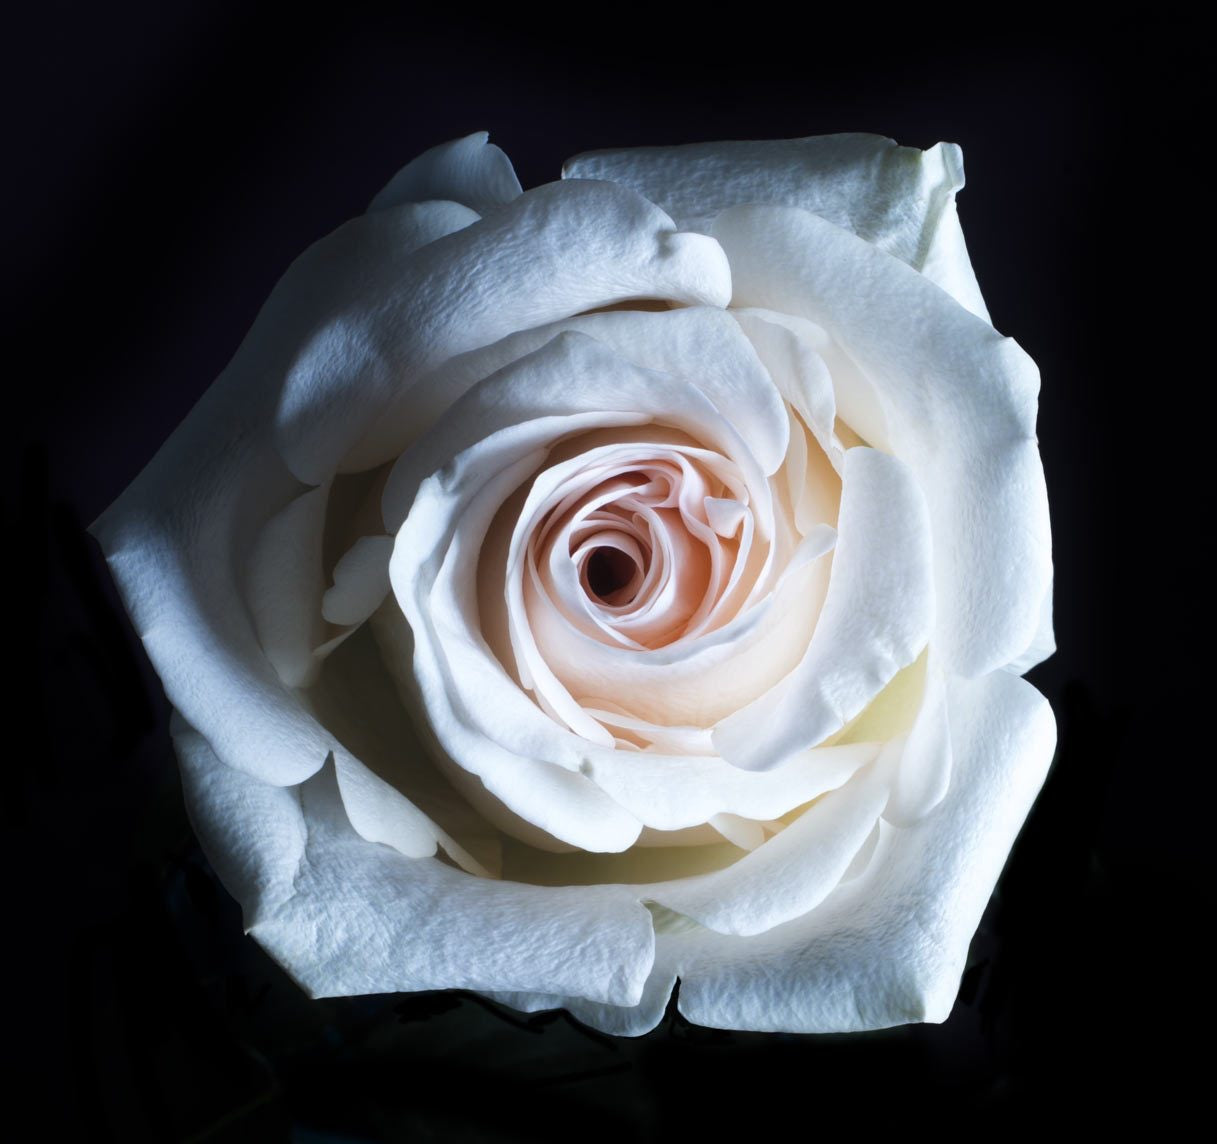 collections/white-rose-close-up.jpg